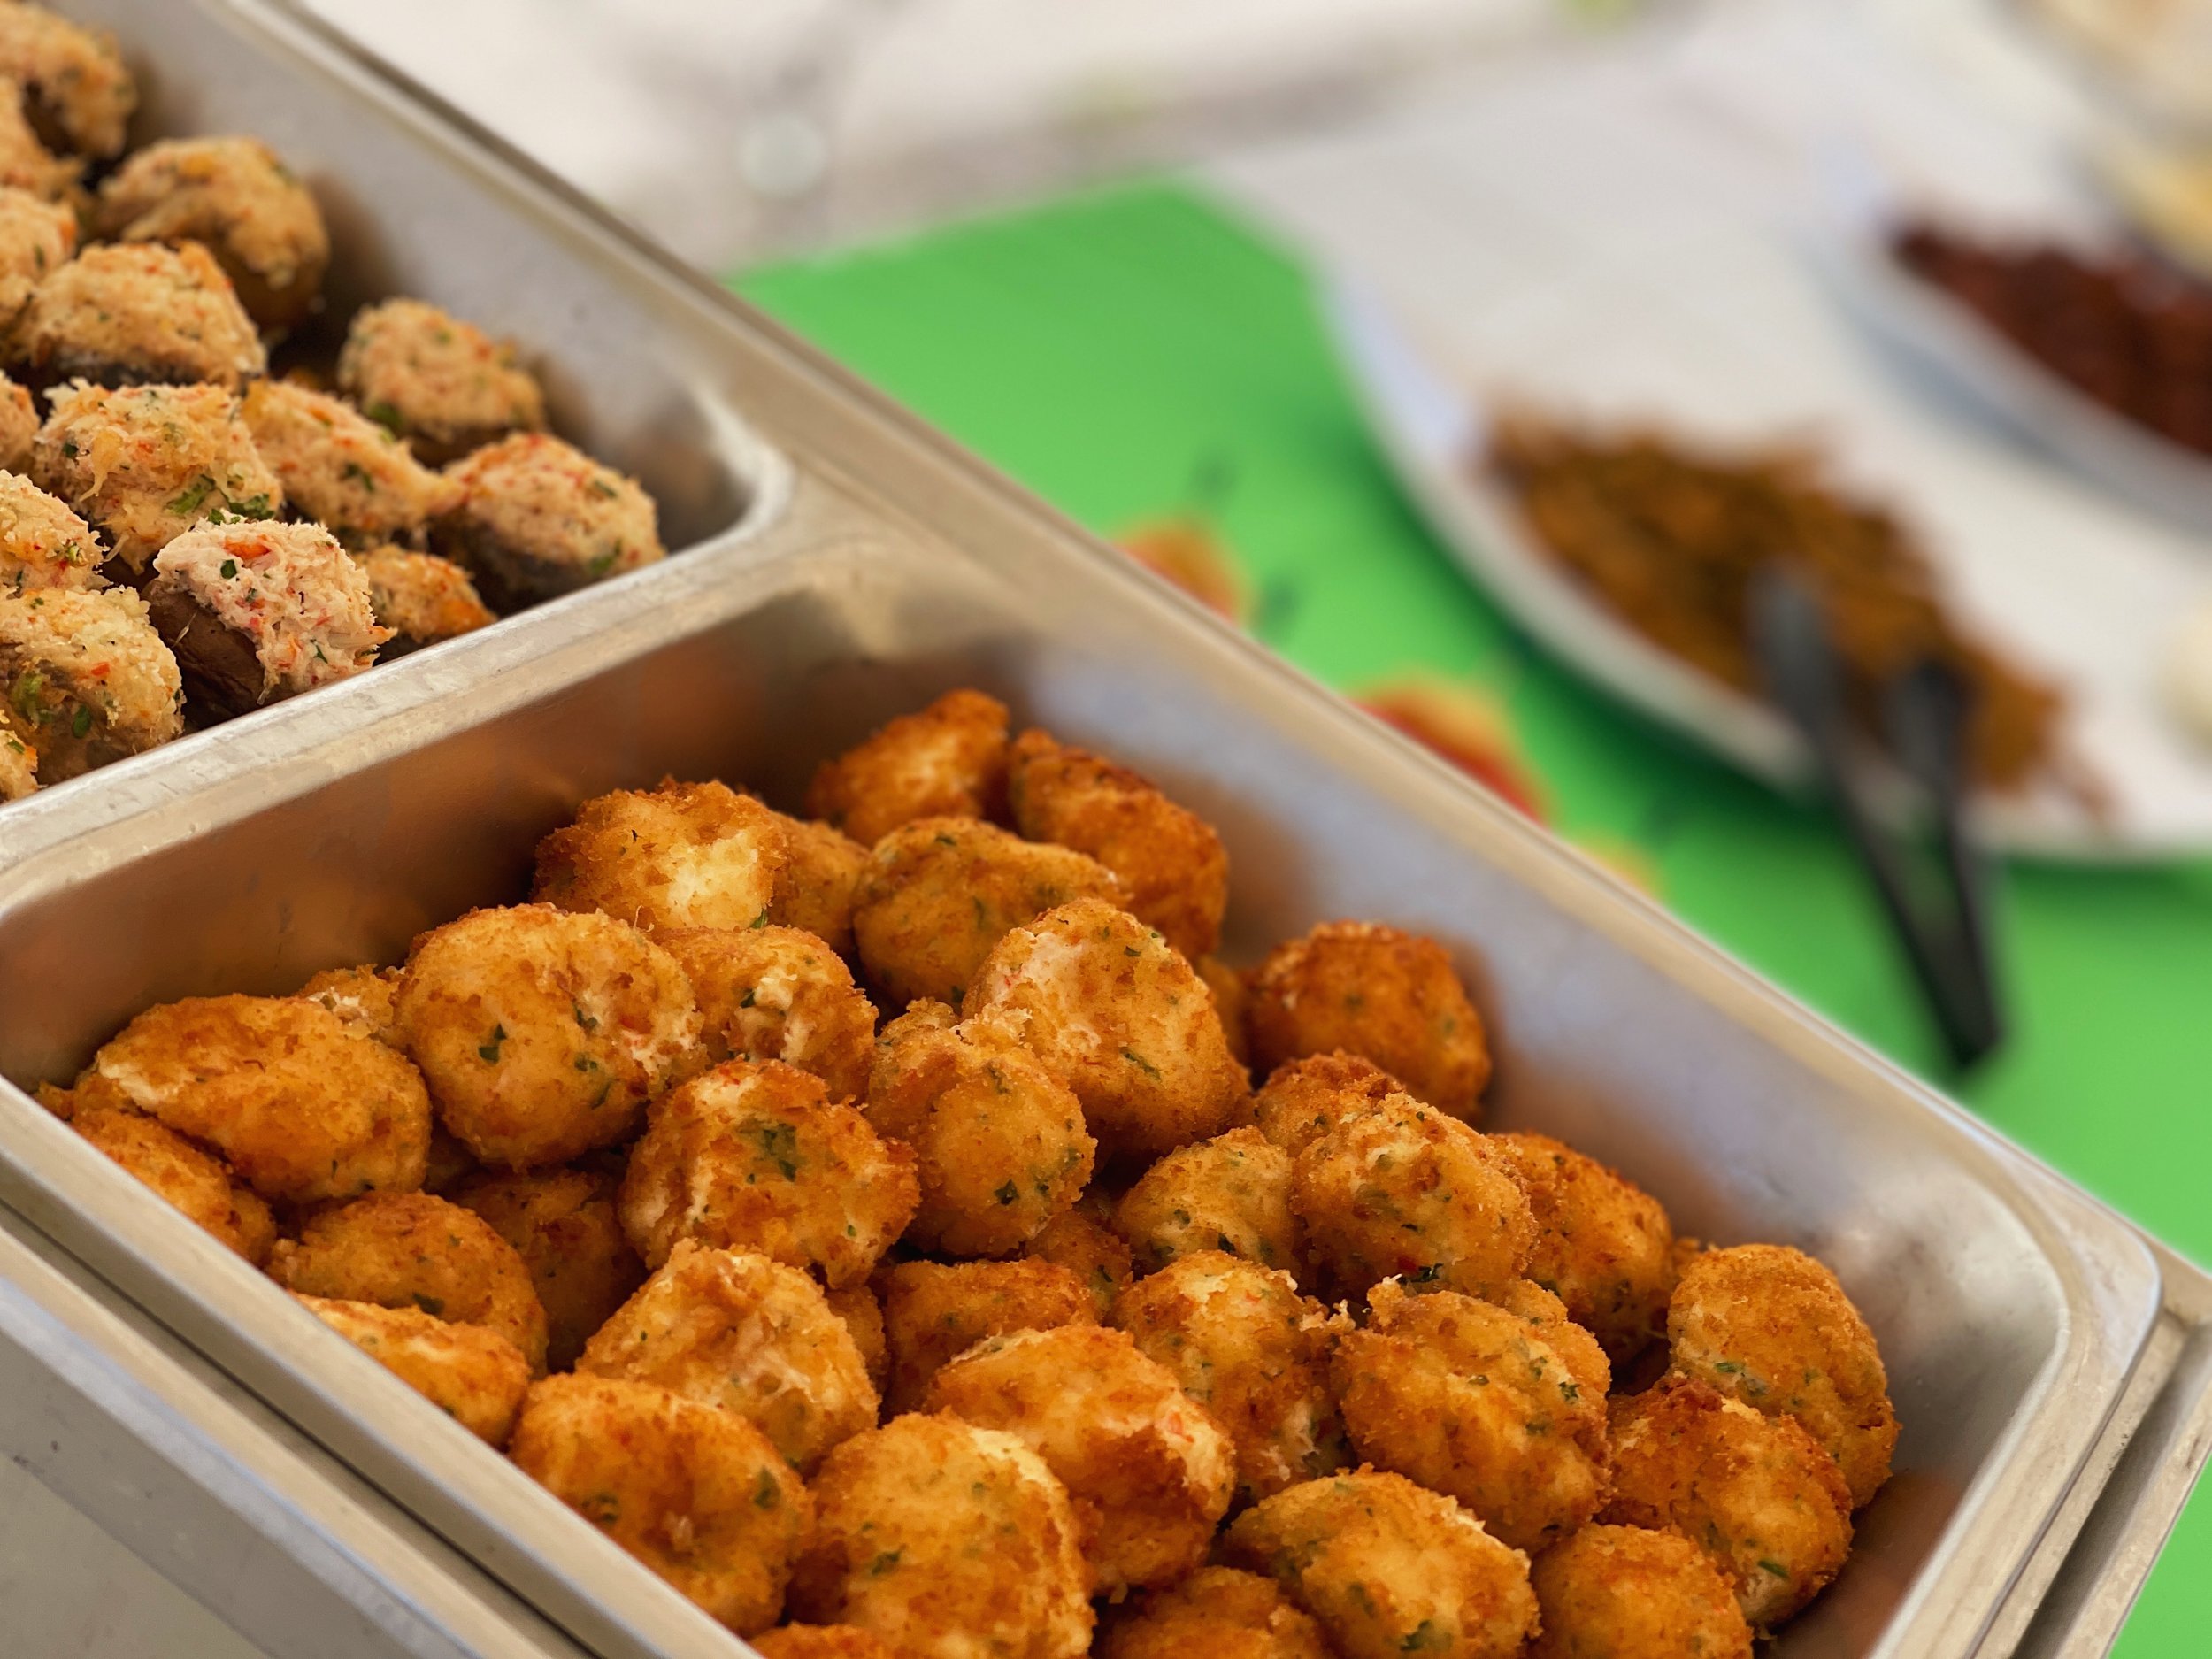 Catering Stuffed mushrooms and crab bites  Star Hotel Catering.JPG